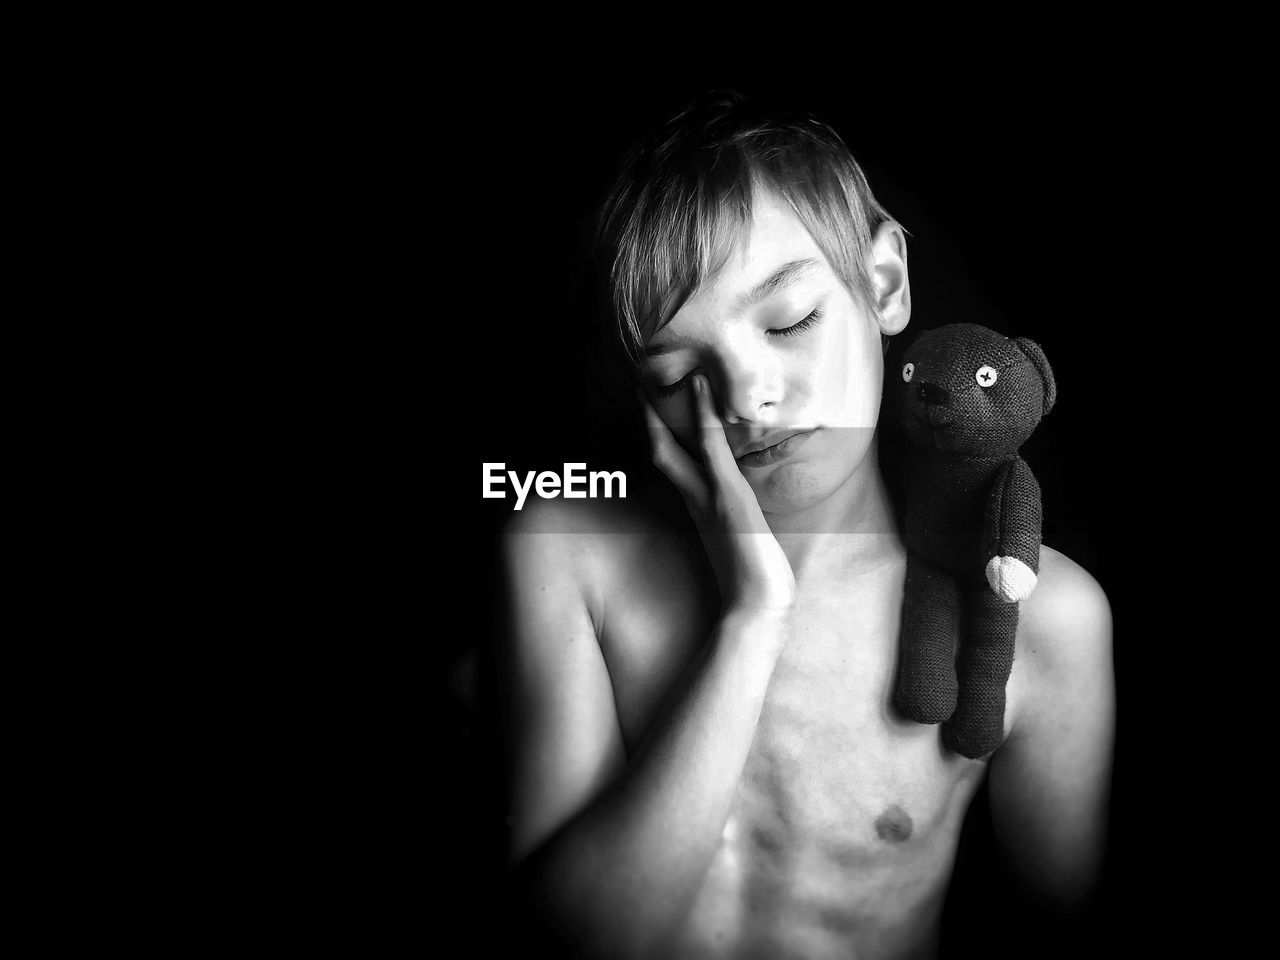 Shirtless boy with toy standing against black background